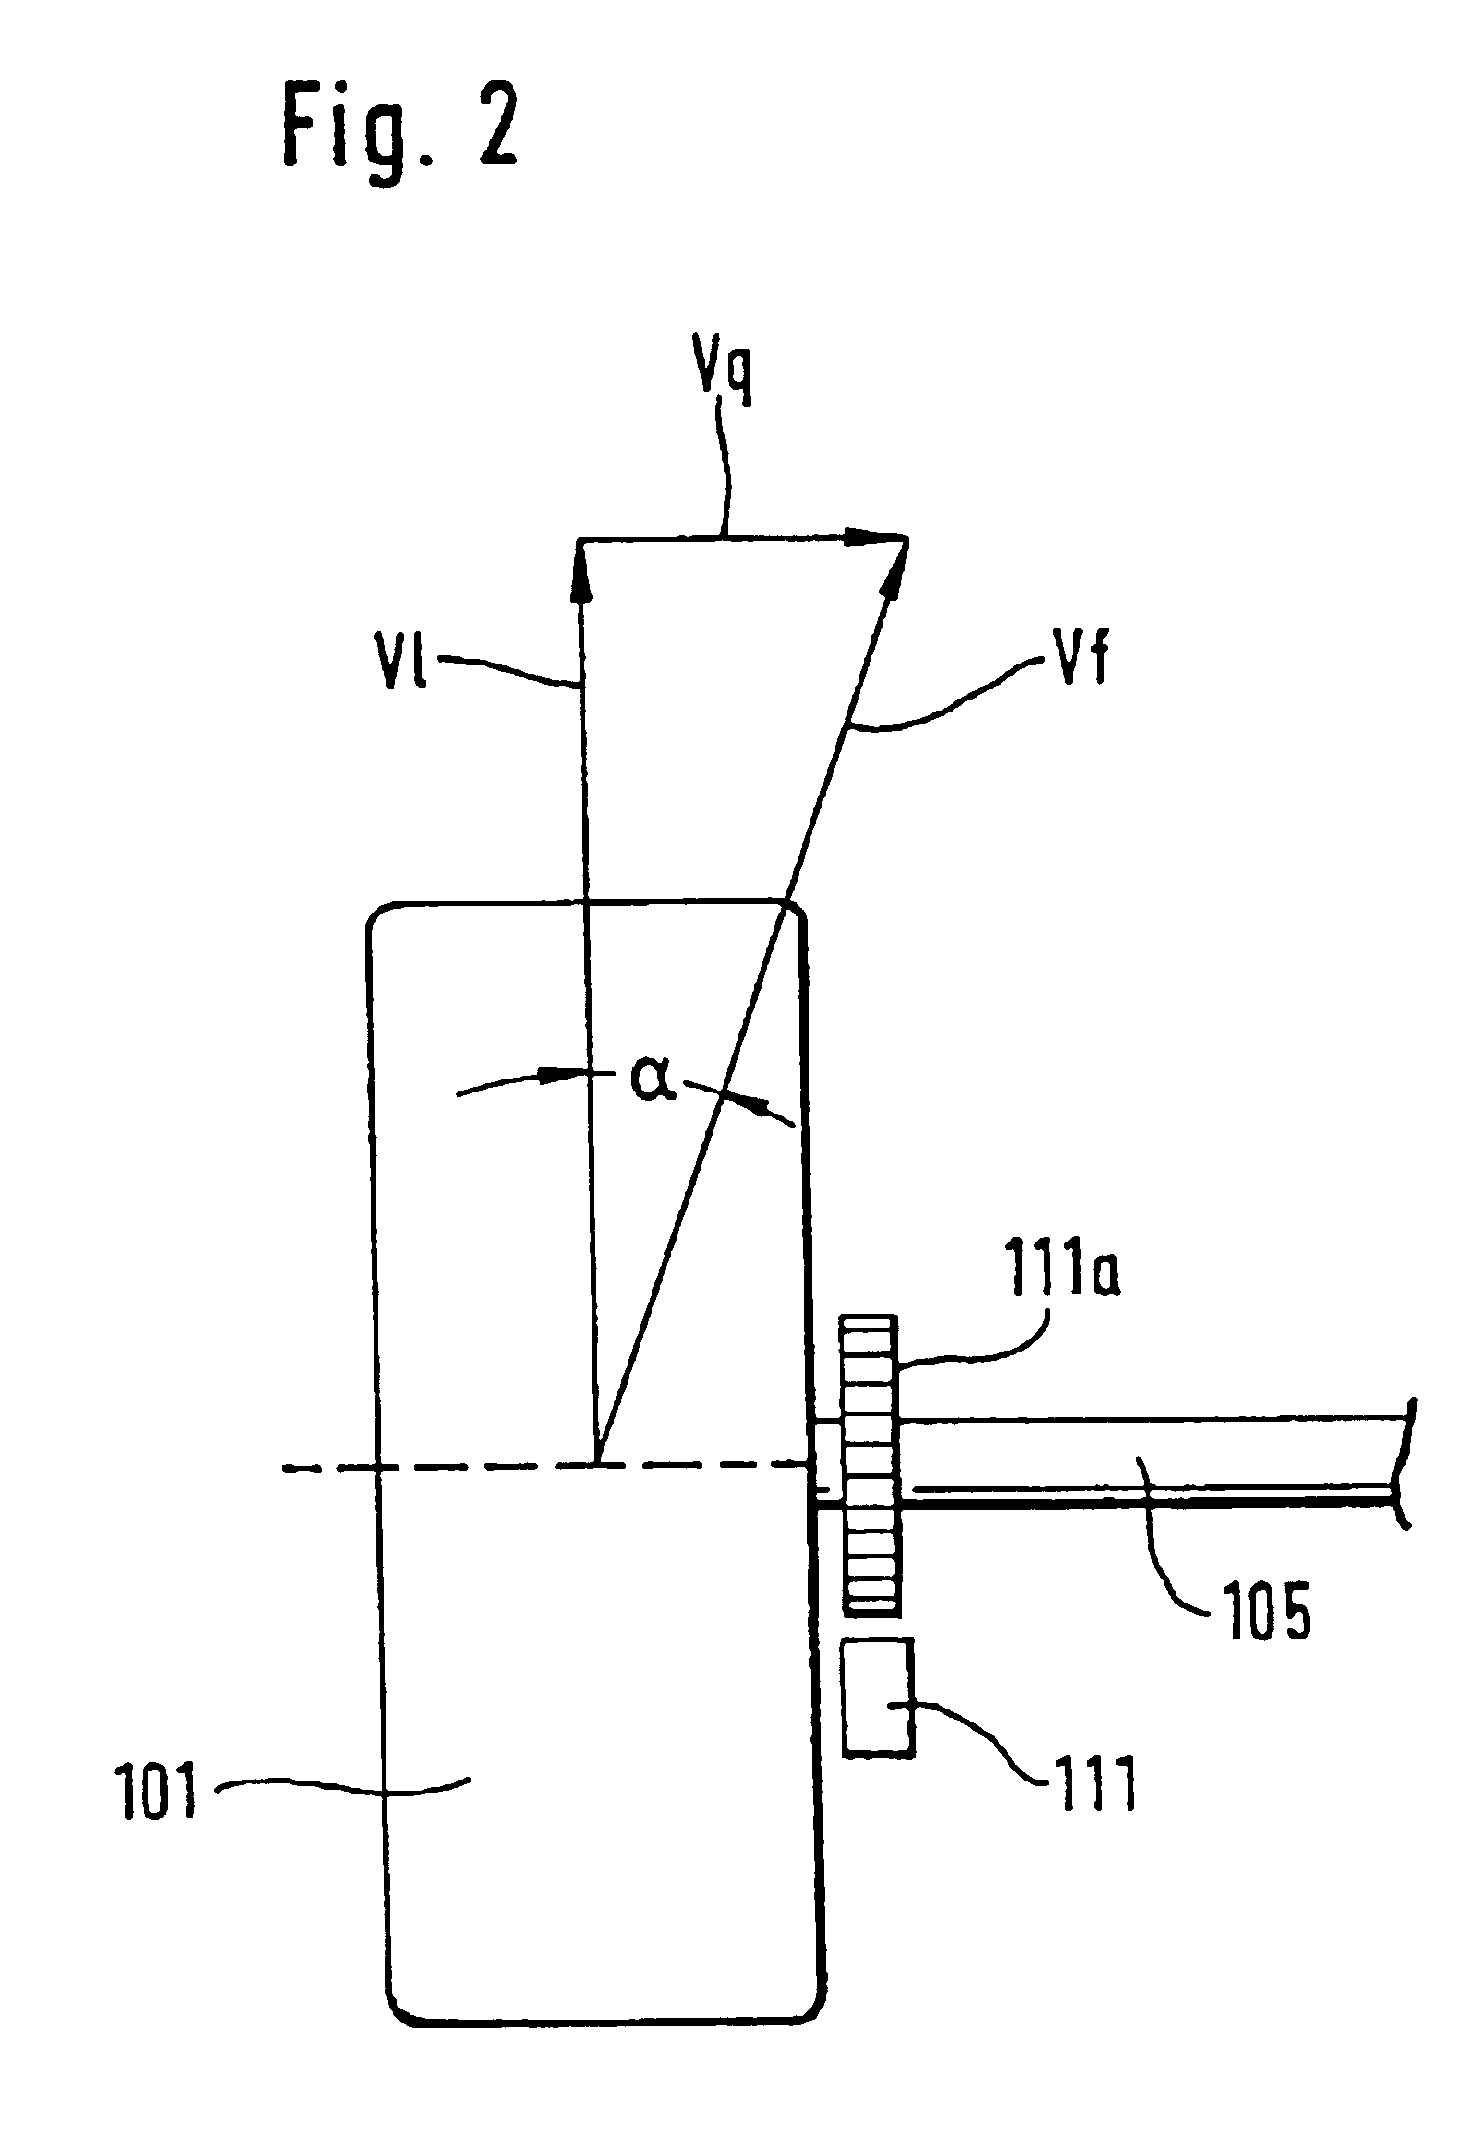 Method and device for recognizing cornering and for stabilizing a vehicle in case of over-steered cornering